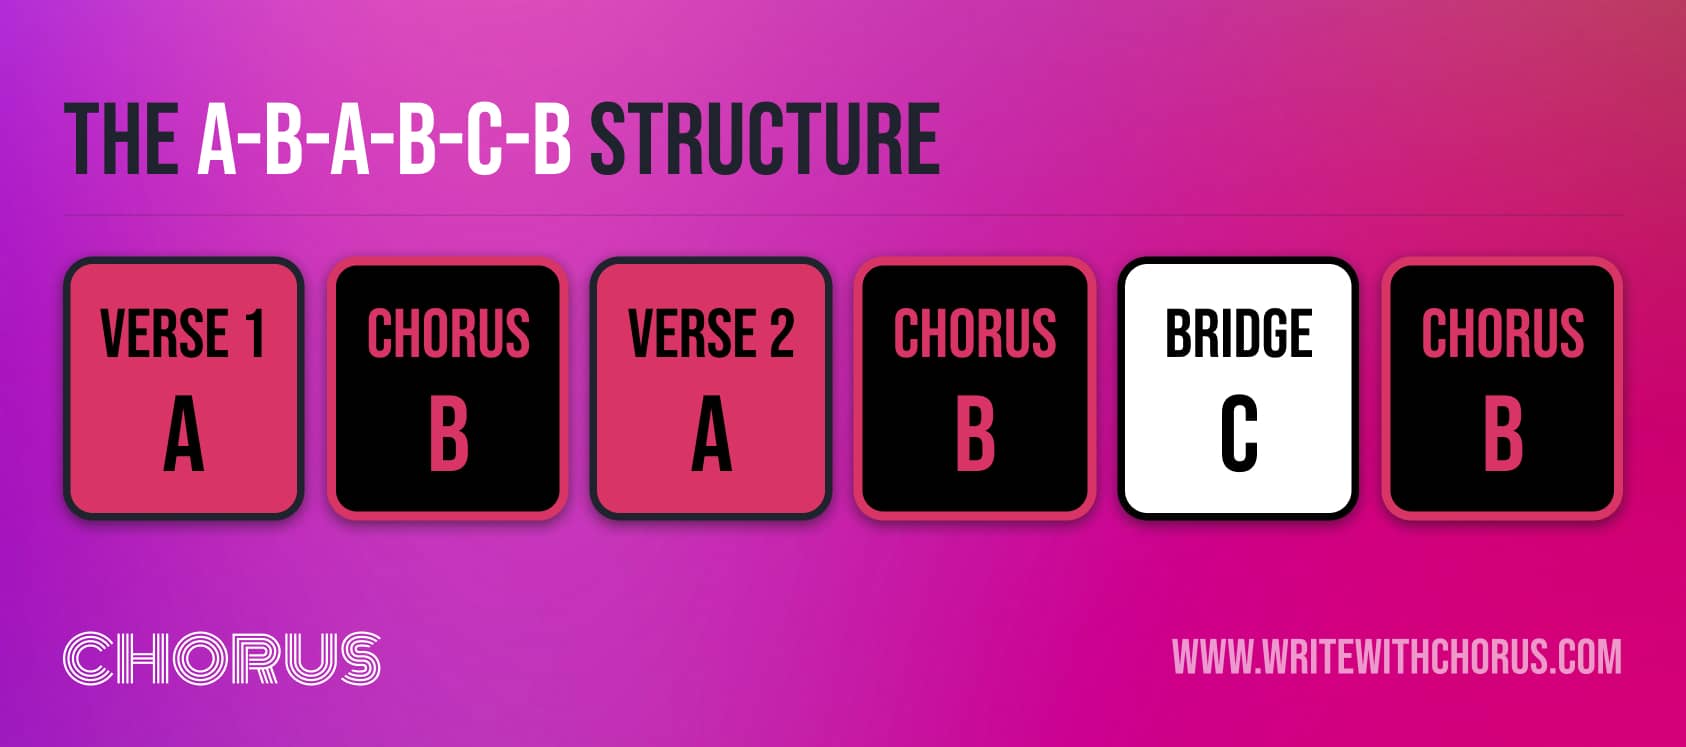 The A-B-A-B-C-B Structure